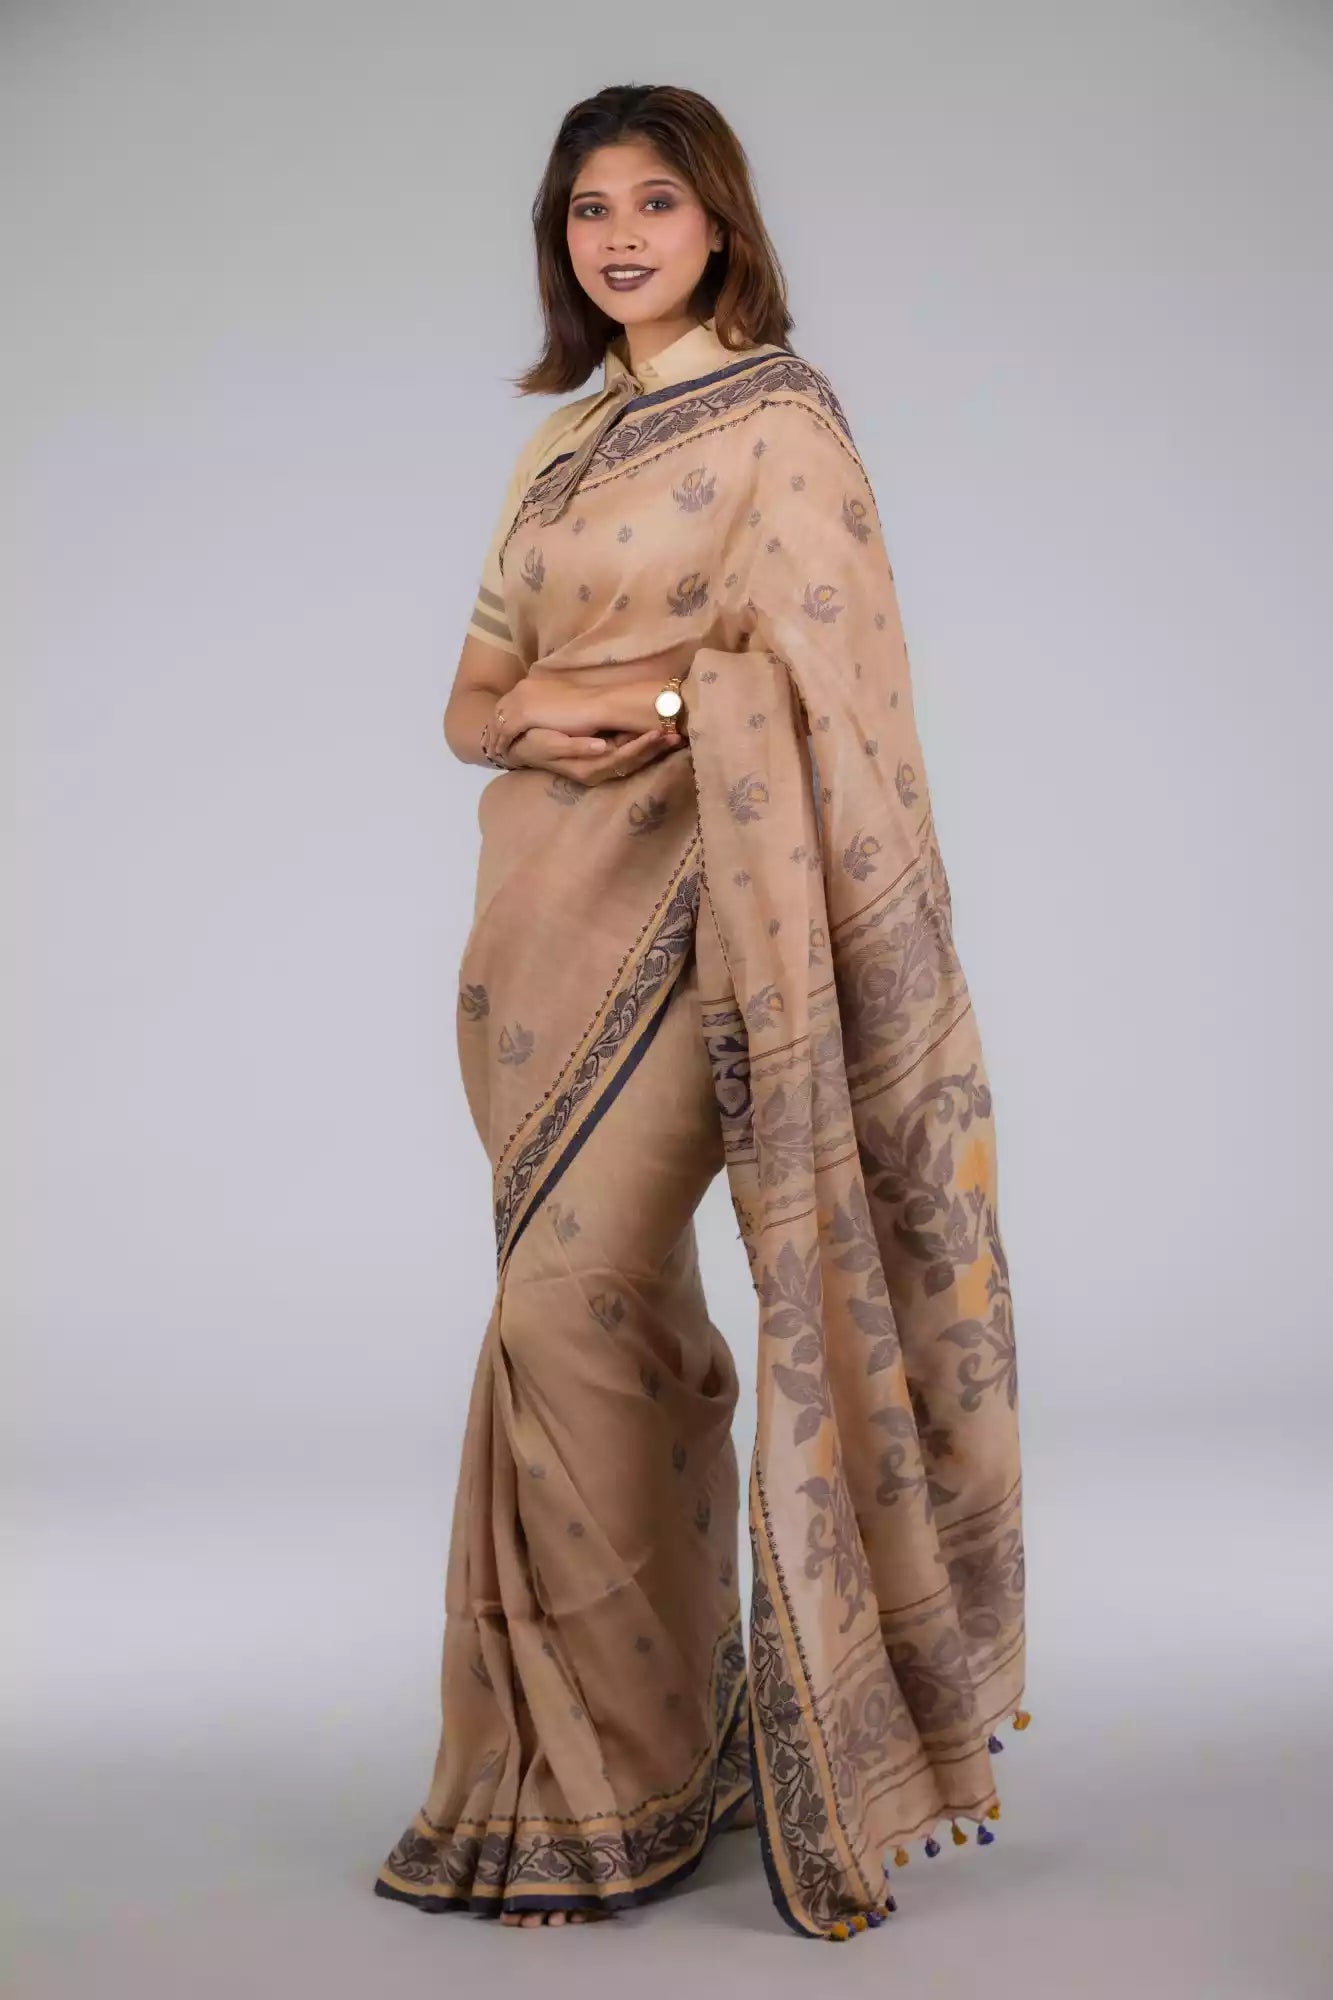 A model in Handwoven Soft Linen Cotton Saree in Beige and Black a womens workwear is standing against a grey background